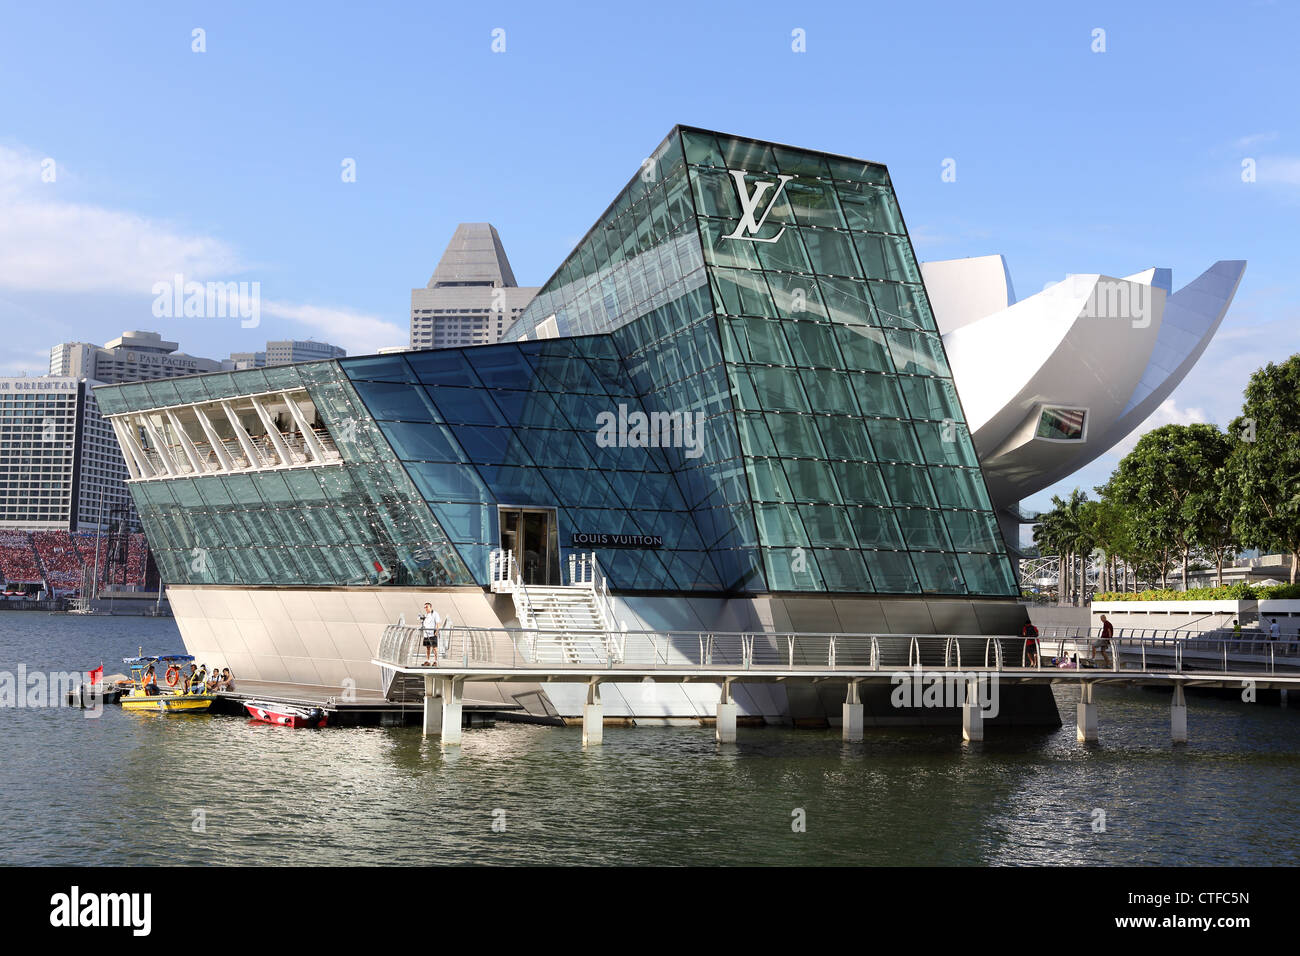 Singapore Gets Louis Vuitton's First Island Mall